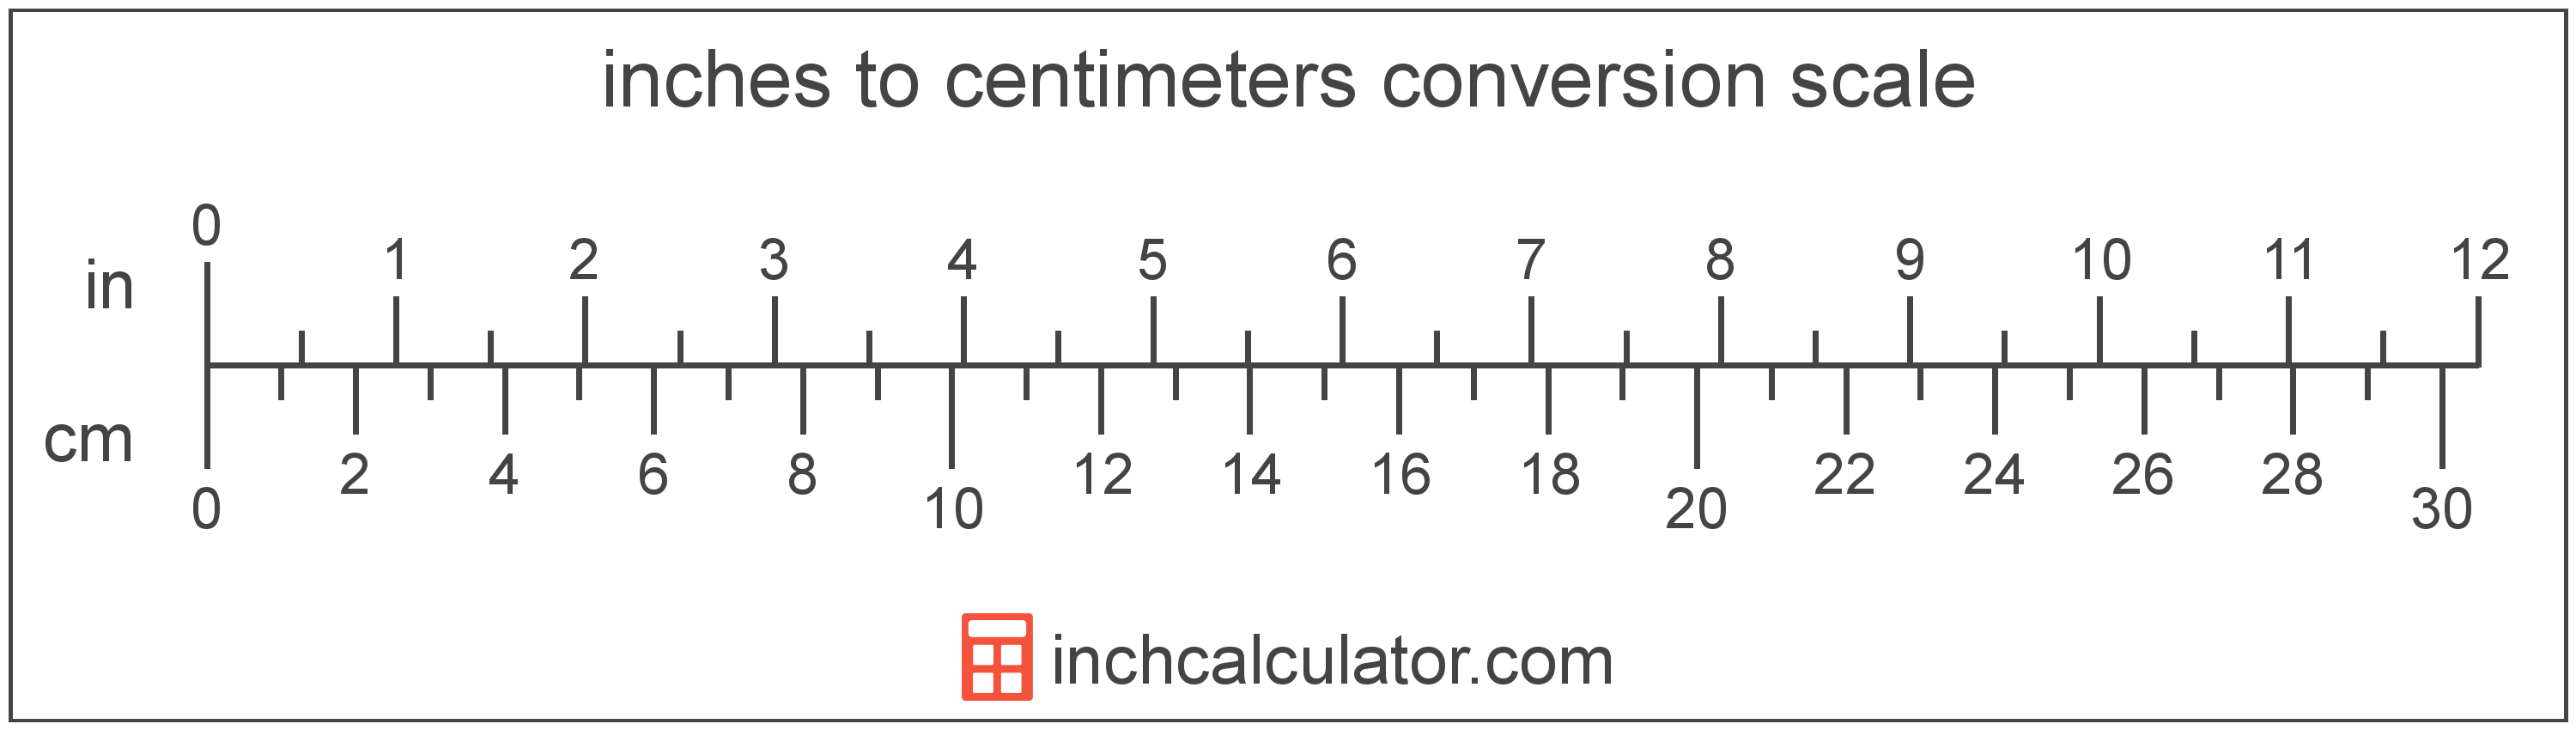 Convert Feet to Centimeters - (ft to cm) - Inch Calculator 48 Feet Equals How Many Yards